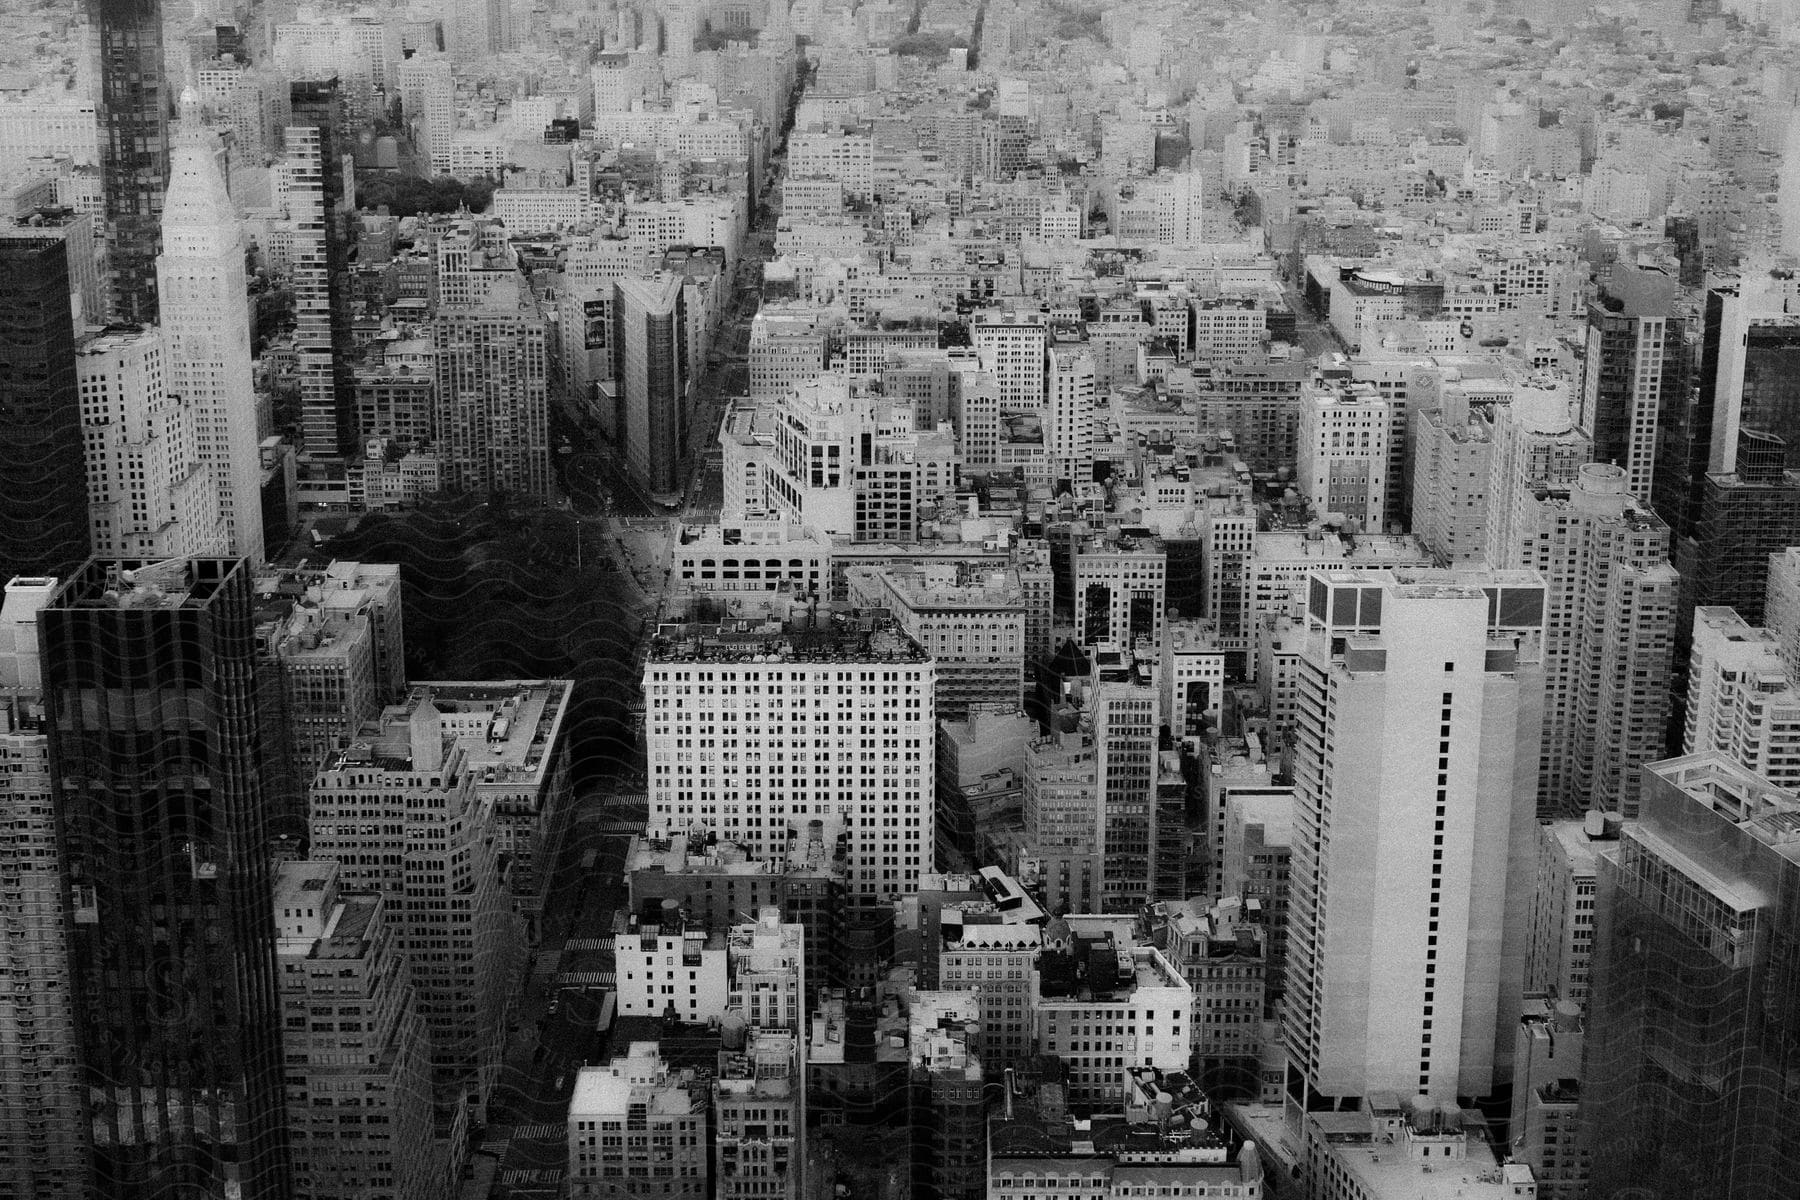 A black and white aerial view of urban buildings in a cityscape